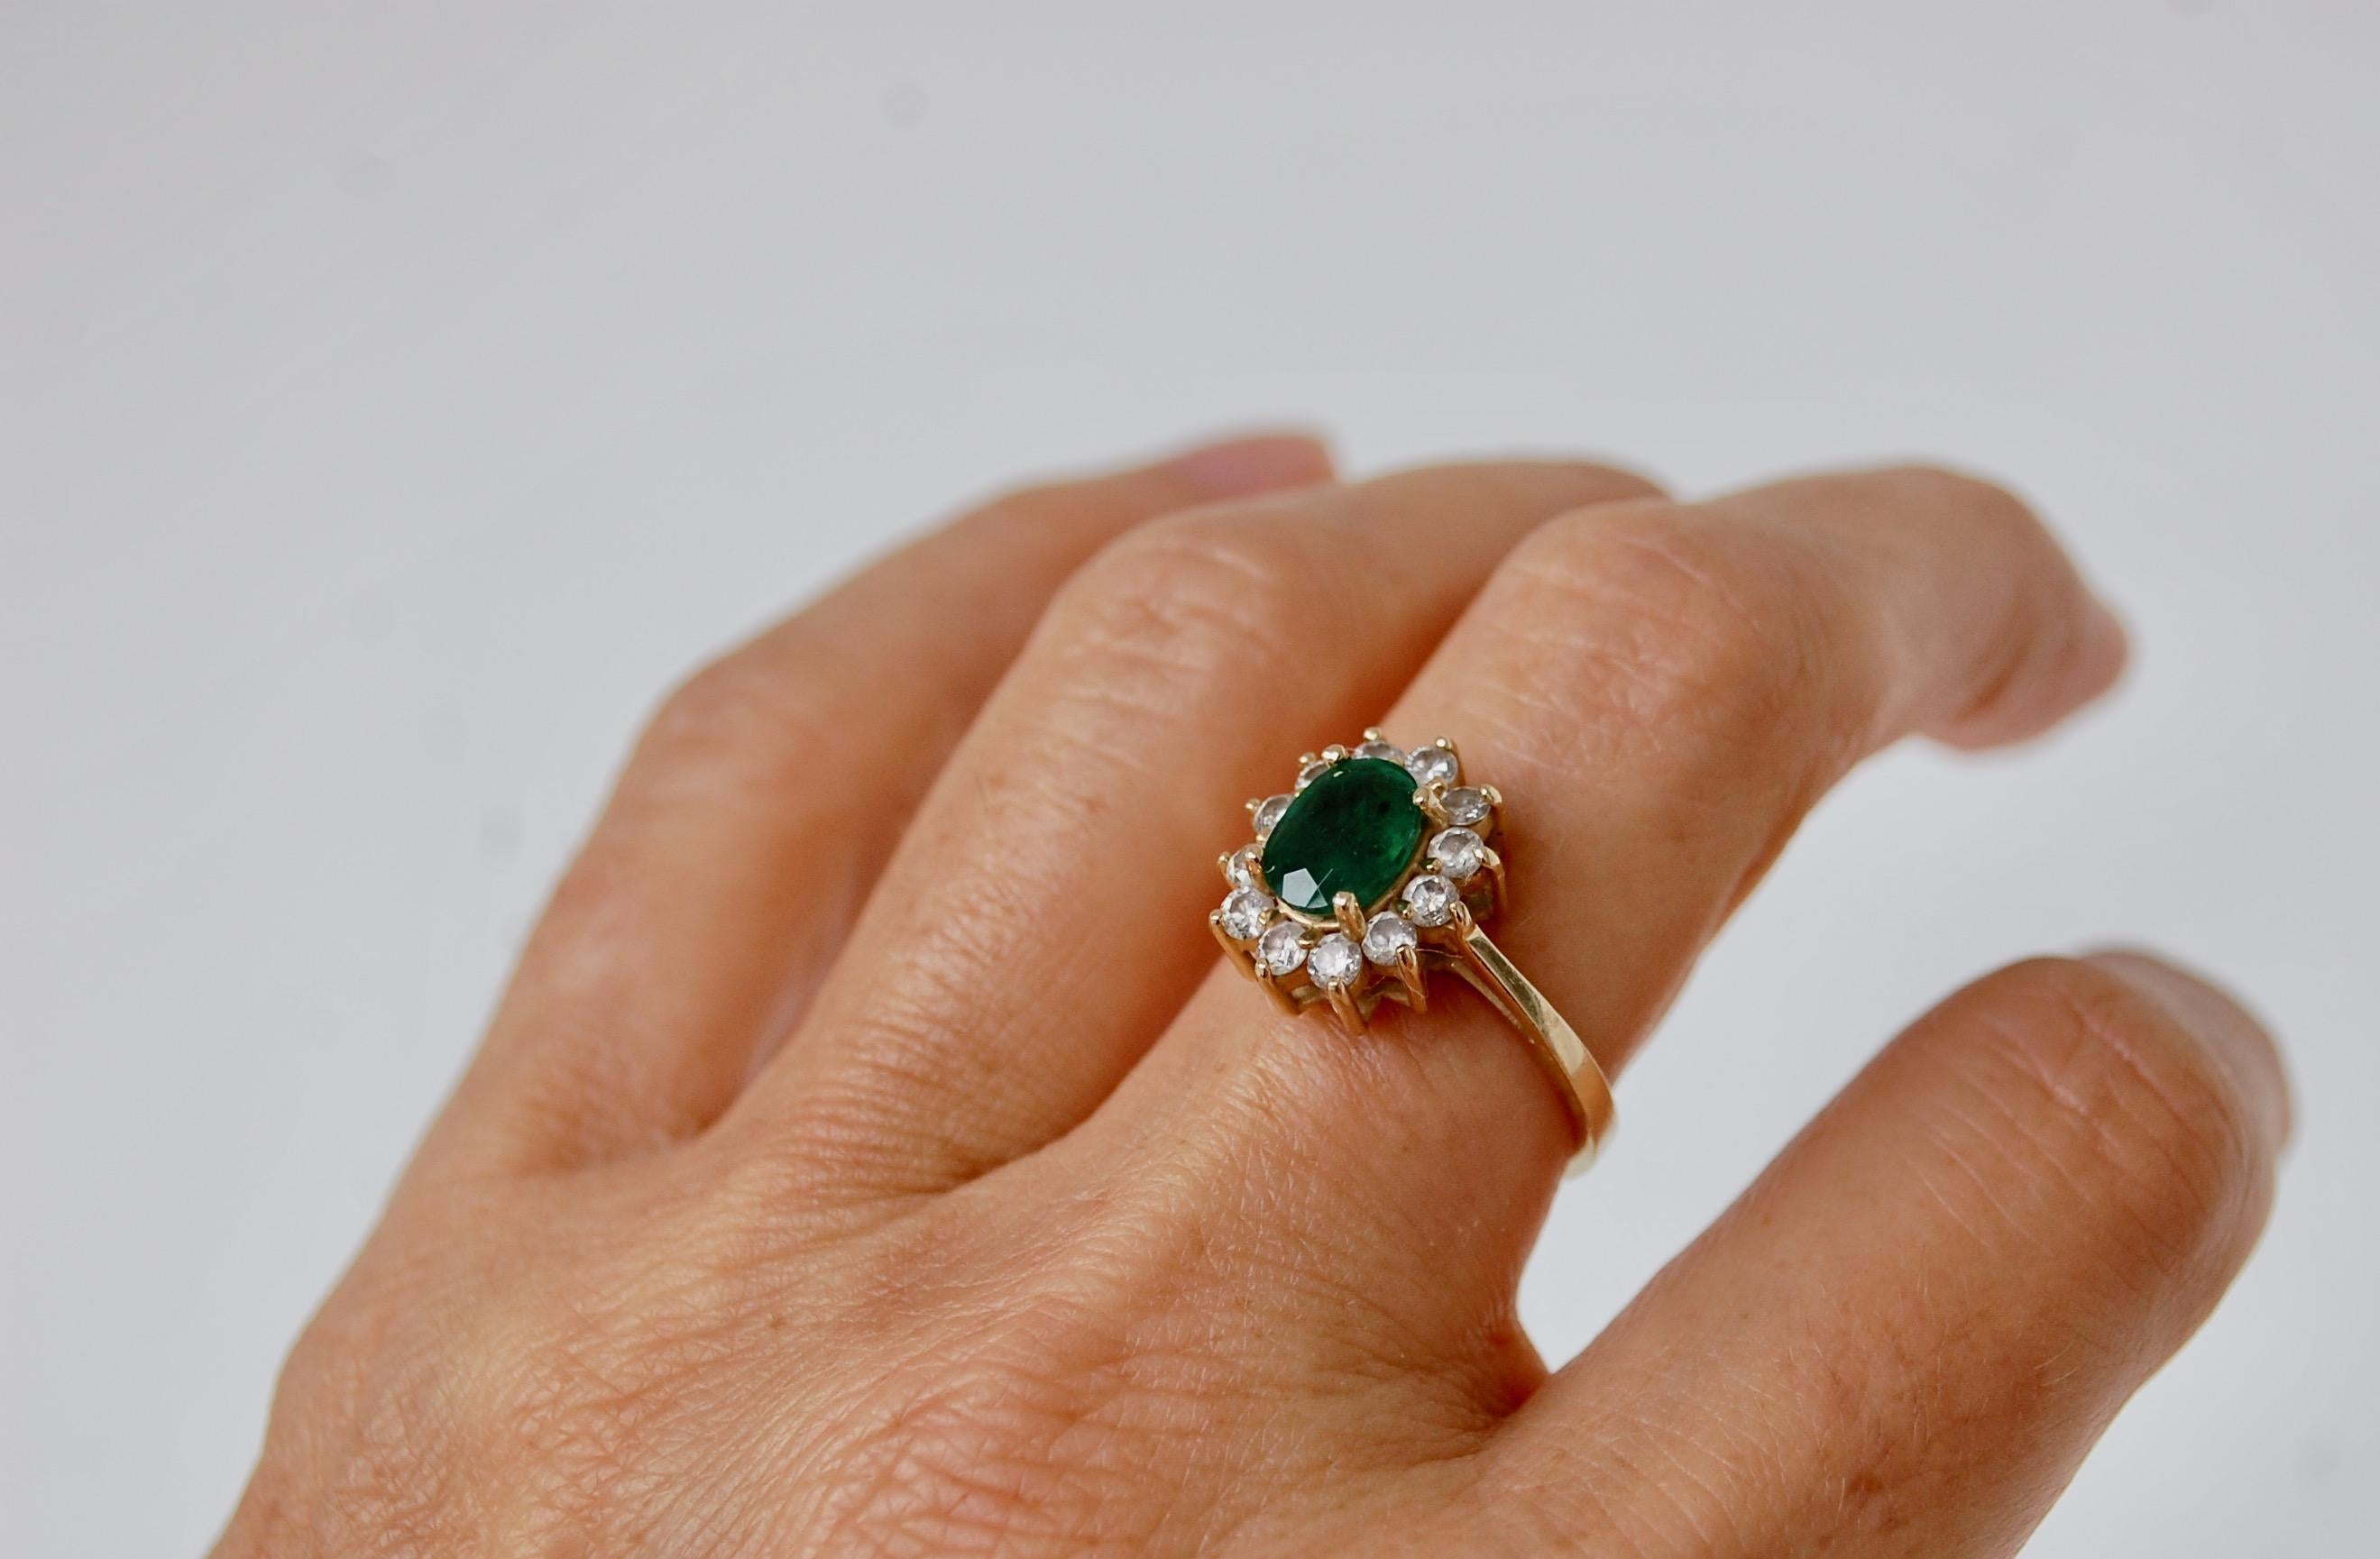 14KG Emerald And Diamond Cocktail Ring
Beautiful vintage 14k yellow gold Princess Di style cocktail deep green emerald and diamond ring.  Mounting with an oval faceted green emerald center of approximately 1.25 carats. Surrounded by a halo of round